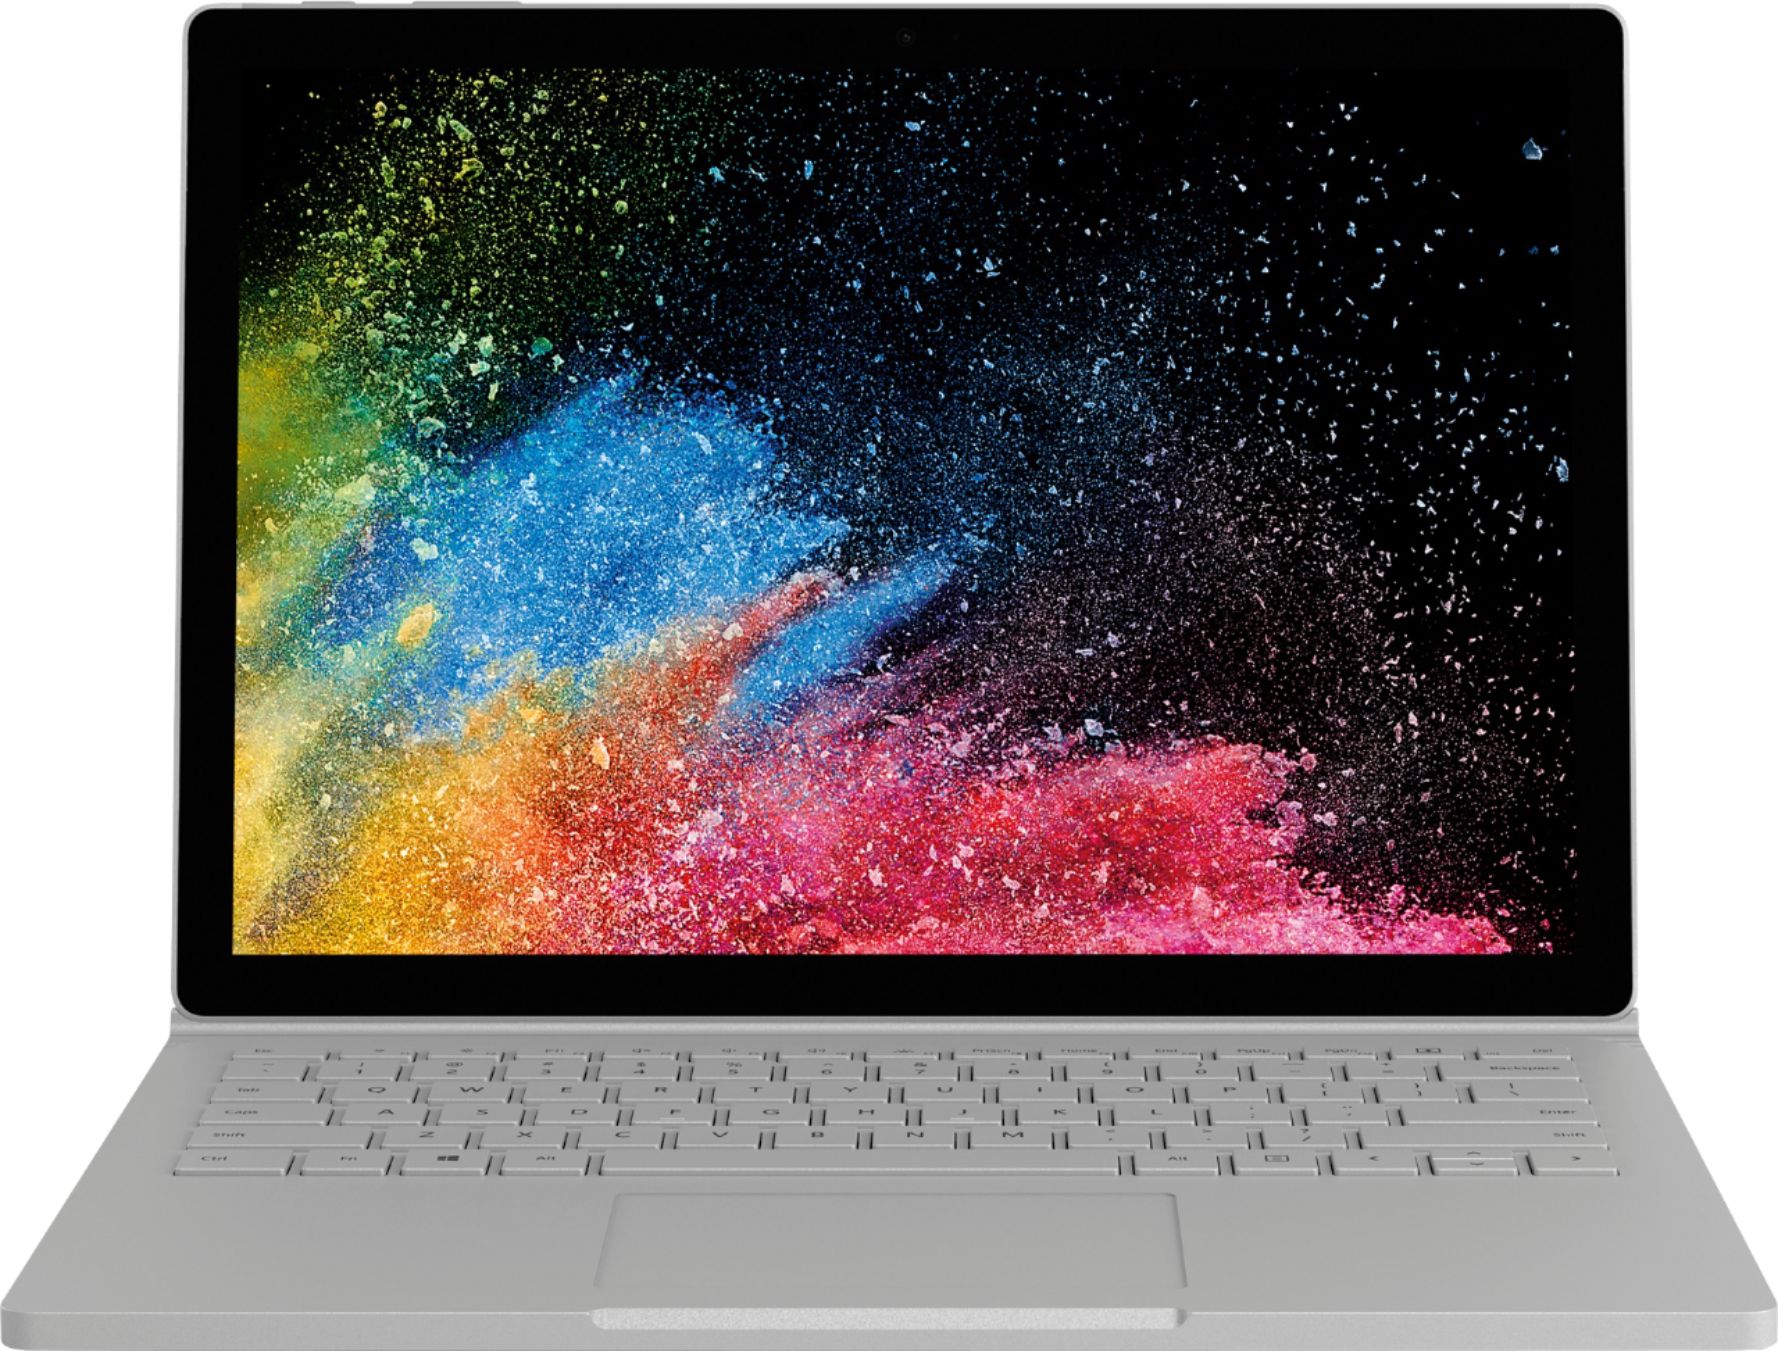 Angle View: Microsoft - Geek Squad Certified Refurbished Surface Book 3 13.5" Touch-Screen Laptop - Intel Core i7 - 16GB - 256GB SSD - Sandstone